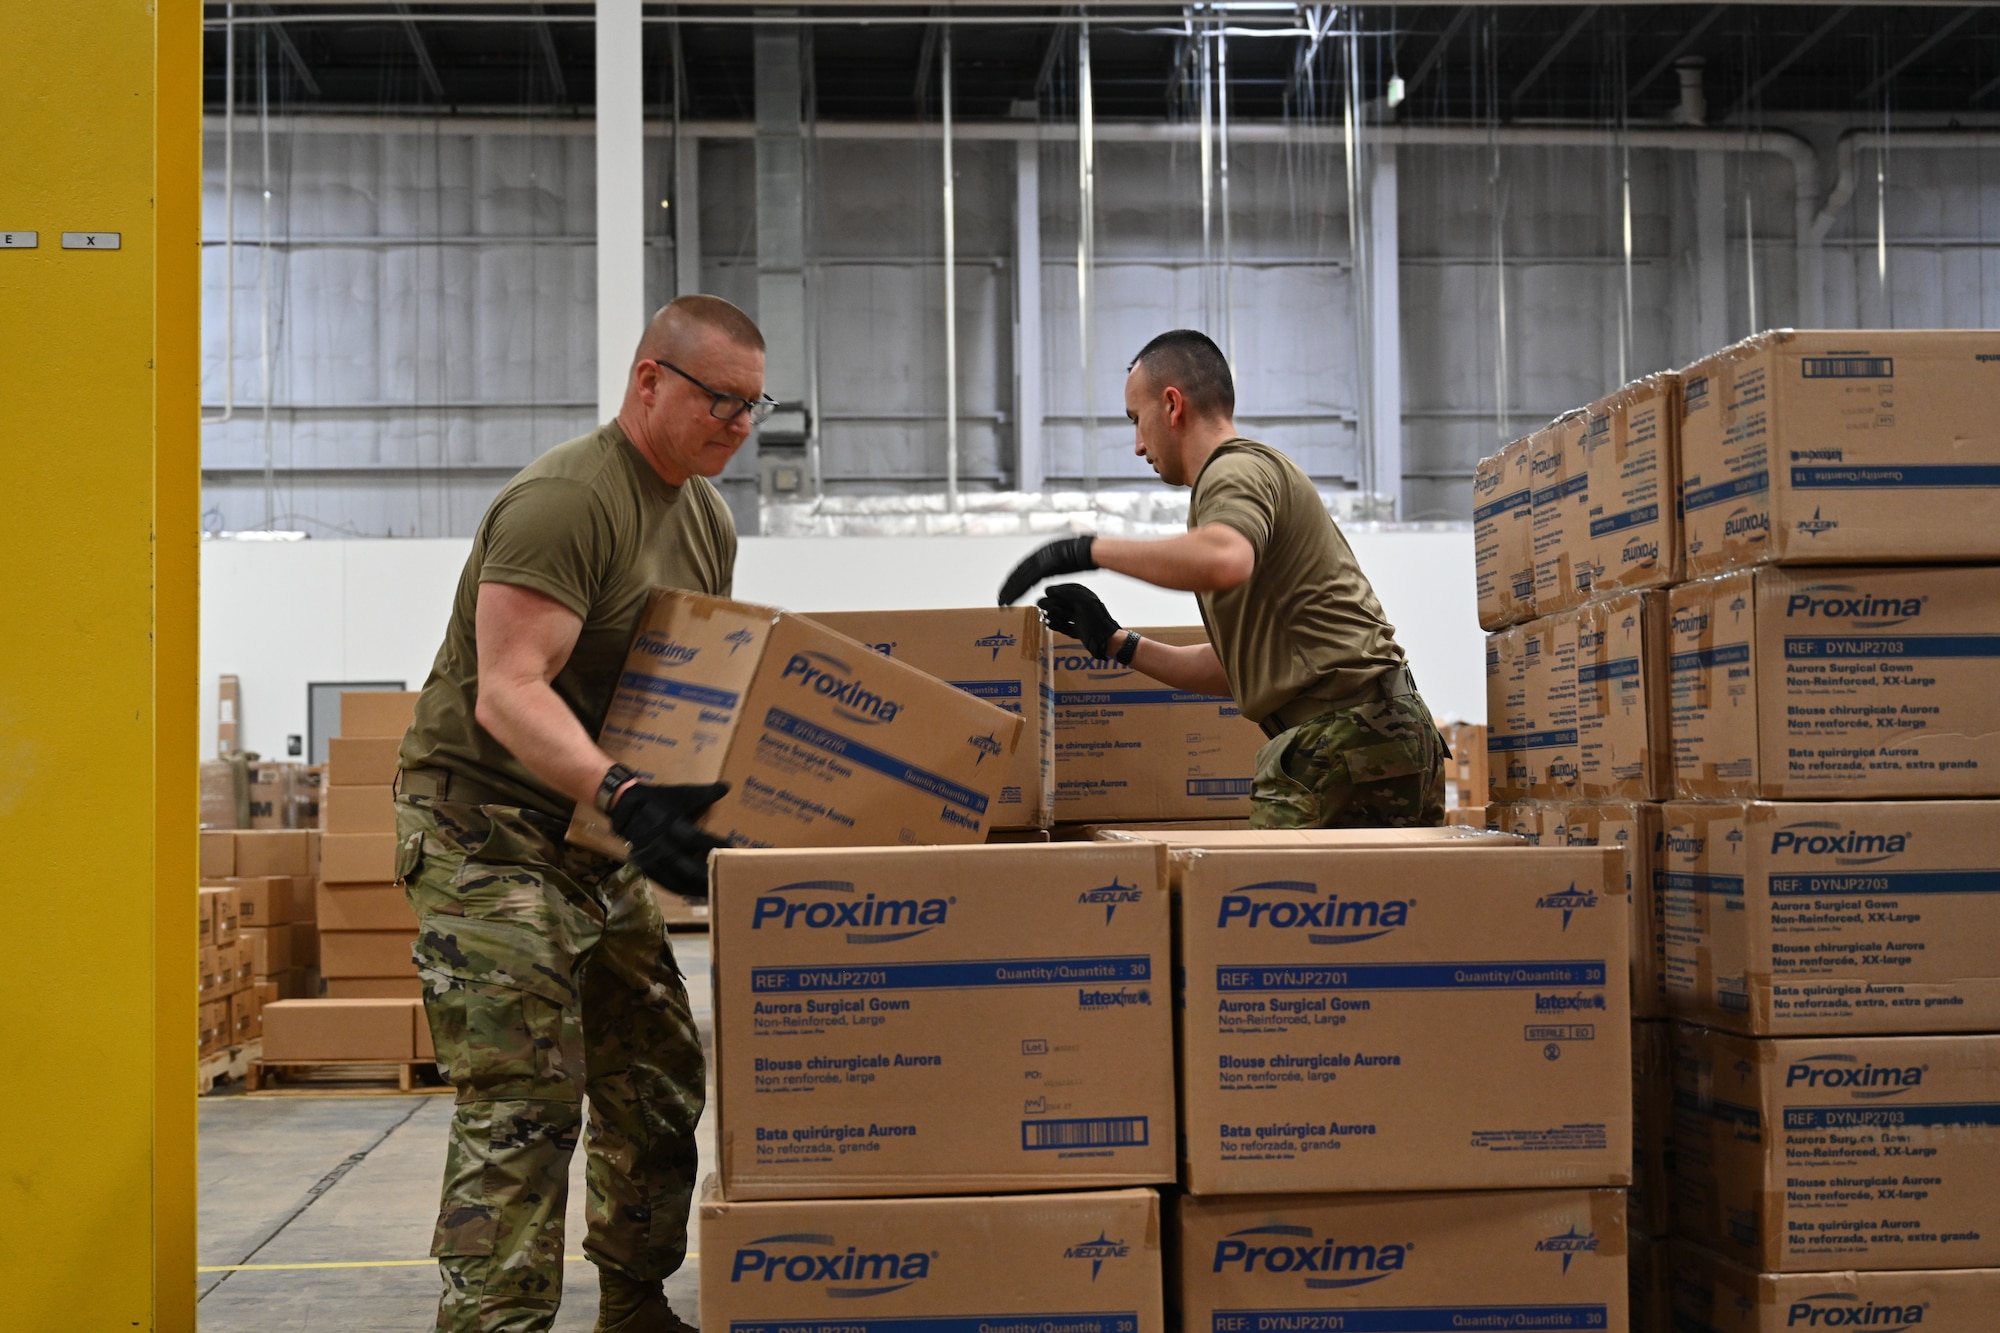 (From left) U.S. Air Force Master Sgt. Richard Malloy and U.S. Air Force Tech. Sgt. Bradly Tuthill, both ground transportation specialists with the 175the Logistics Readiness Squadron, prepare and load boxes of medical supplies and equipment March 19, 2020, at the Maryland Strategic National Stockpile location. All assets provided were prioritized for health care workers and hospitals in response to the COVID-19 pandemic. (U.S. Air National Guard photo by Master Sgt. Christopher Schepers)